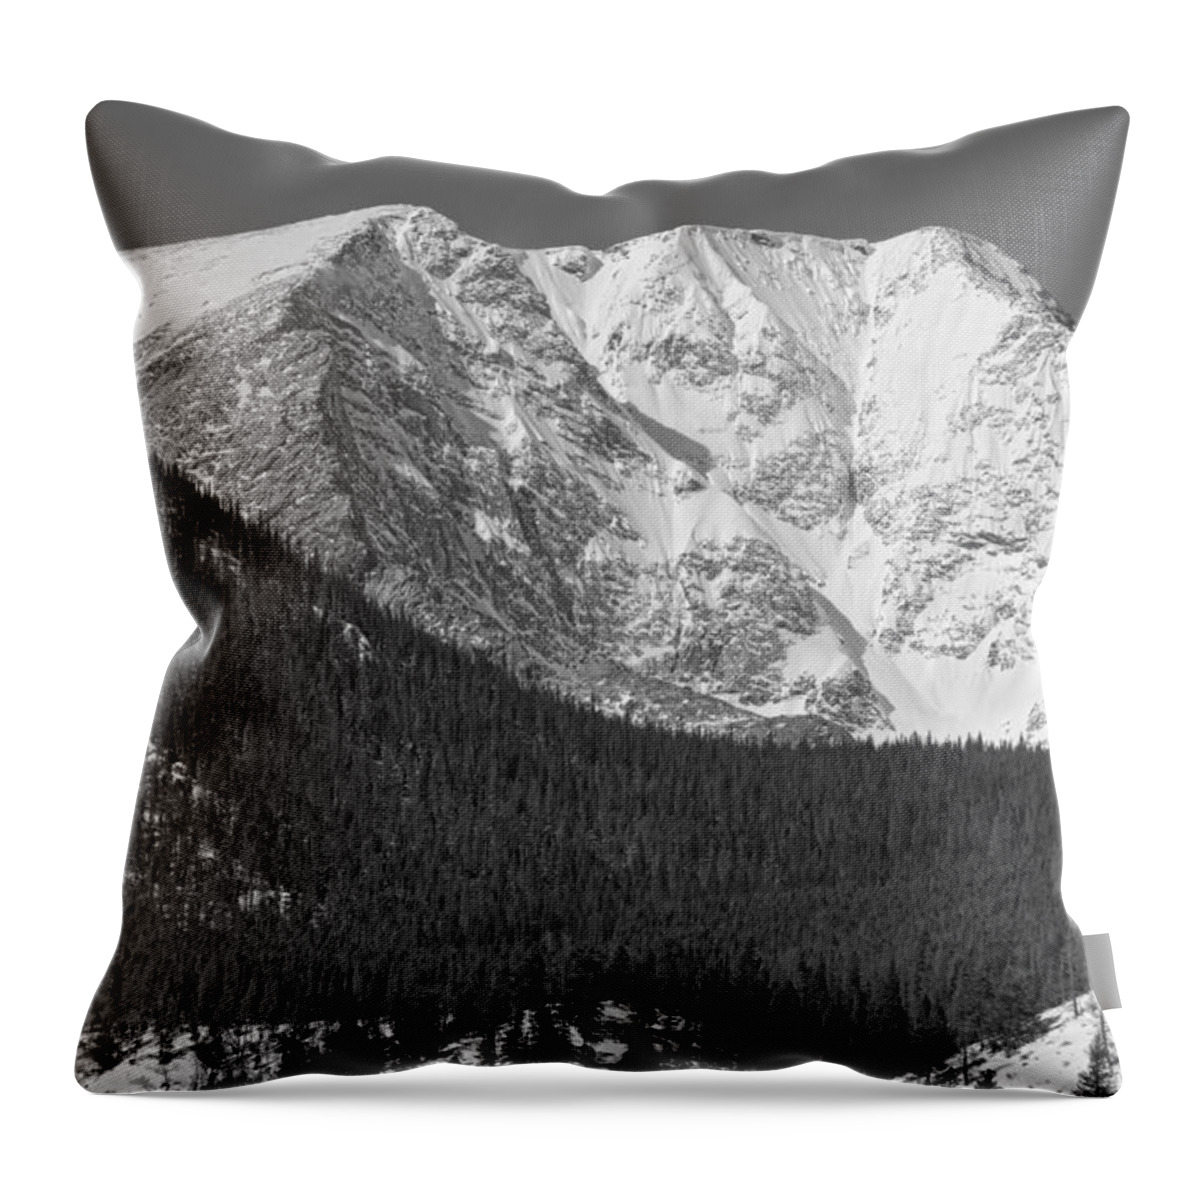 Rocky Mountains Throw Pillow featuring the photograph Colorado Ypsilon Mountain Rocky Mountain National Park by James BO Insogna